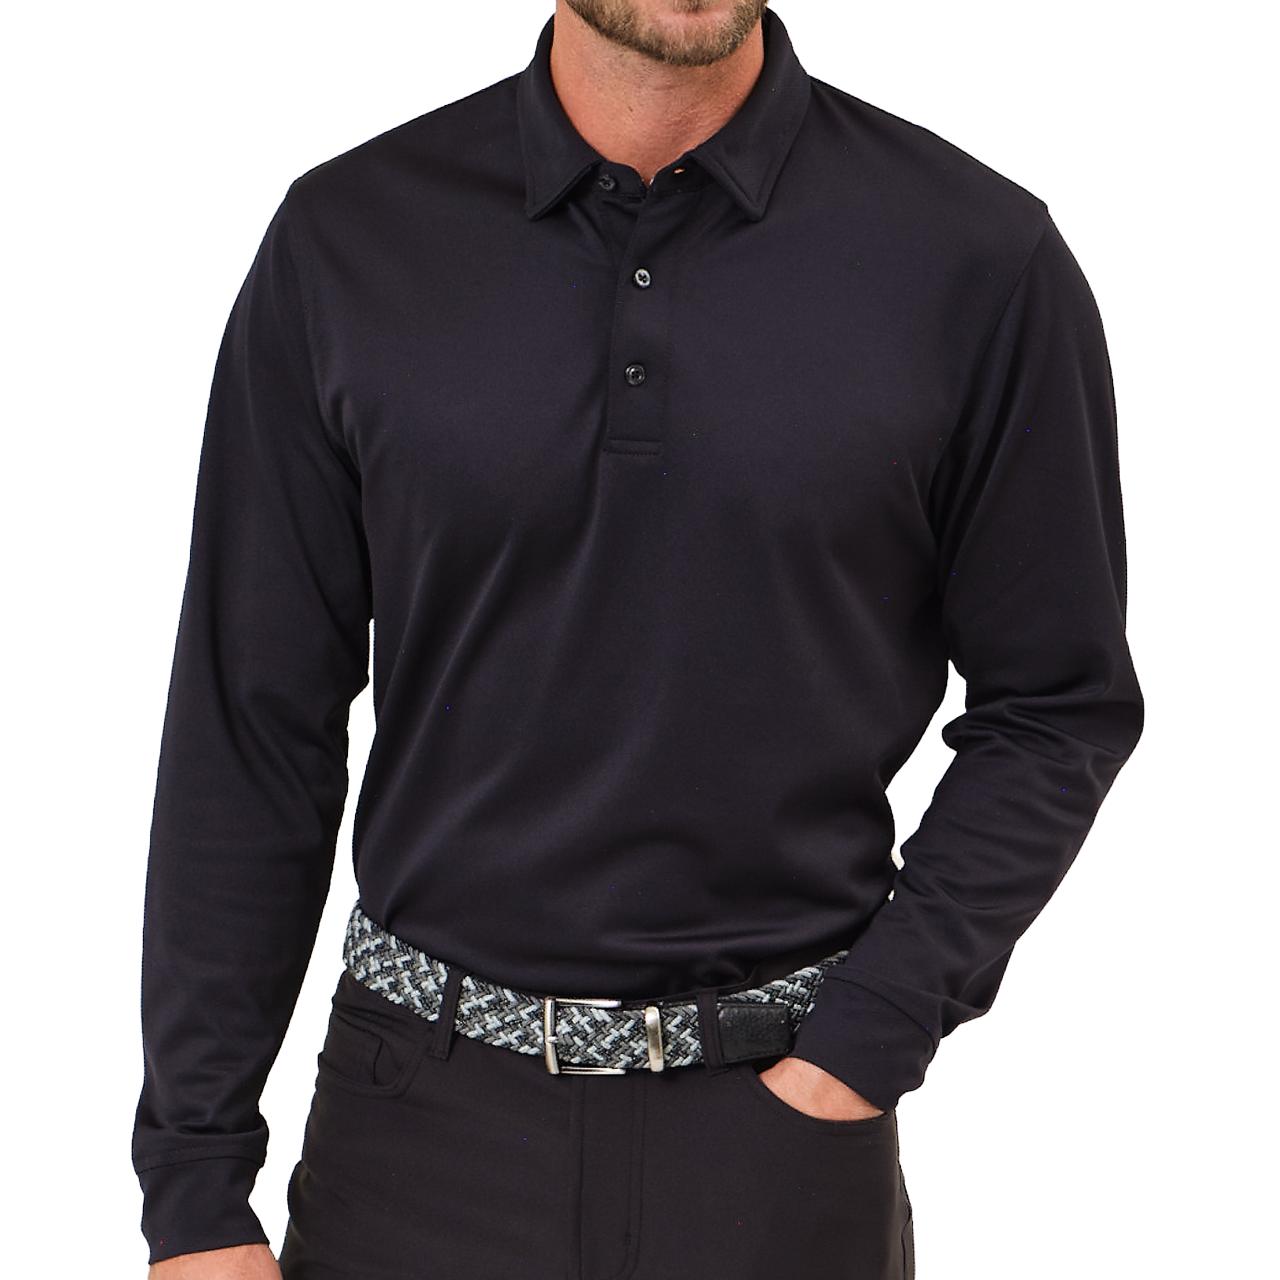 Player Pique Long-Sleeve Performance Polo - Dunning